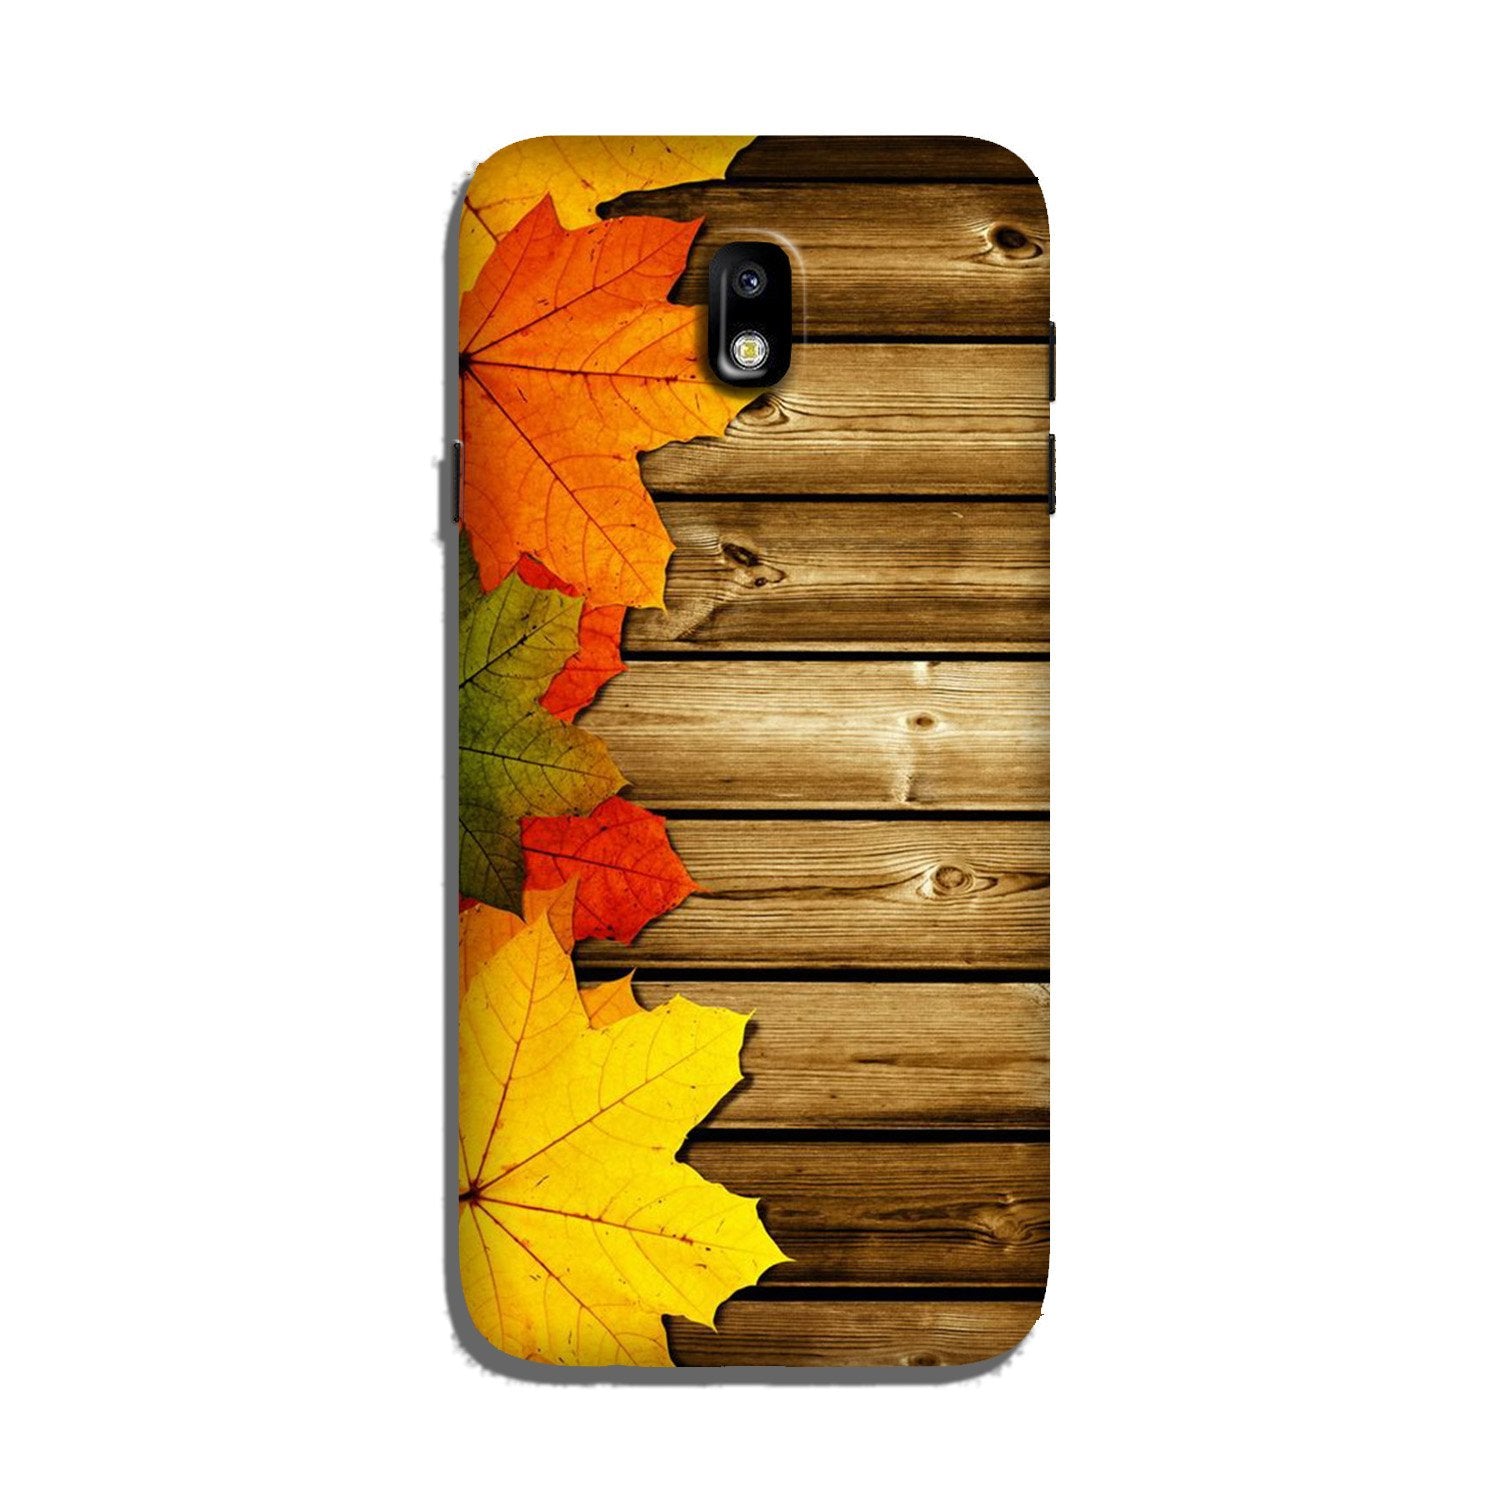 Wooden look3 Case for Galaxy J3 Pro